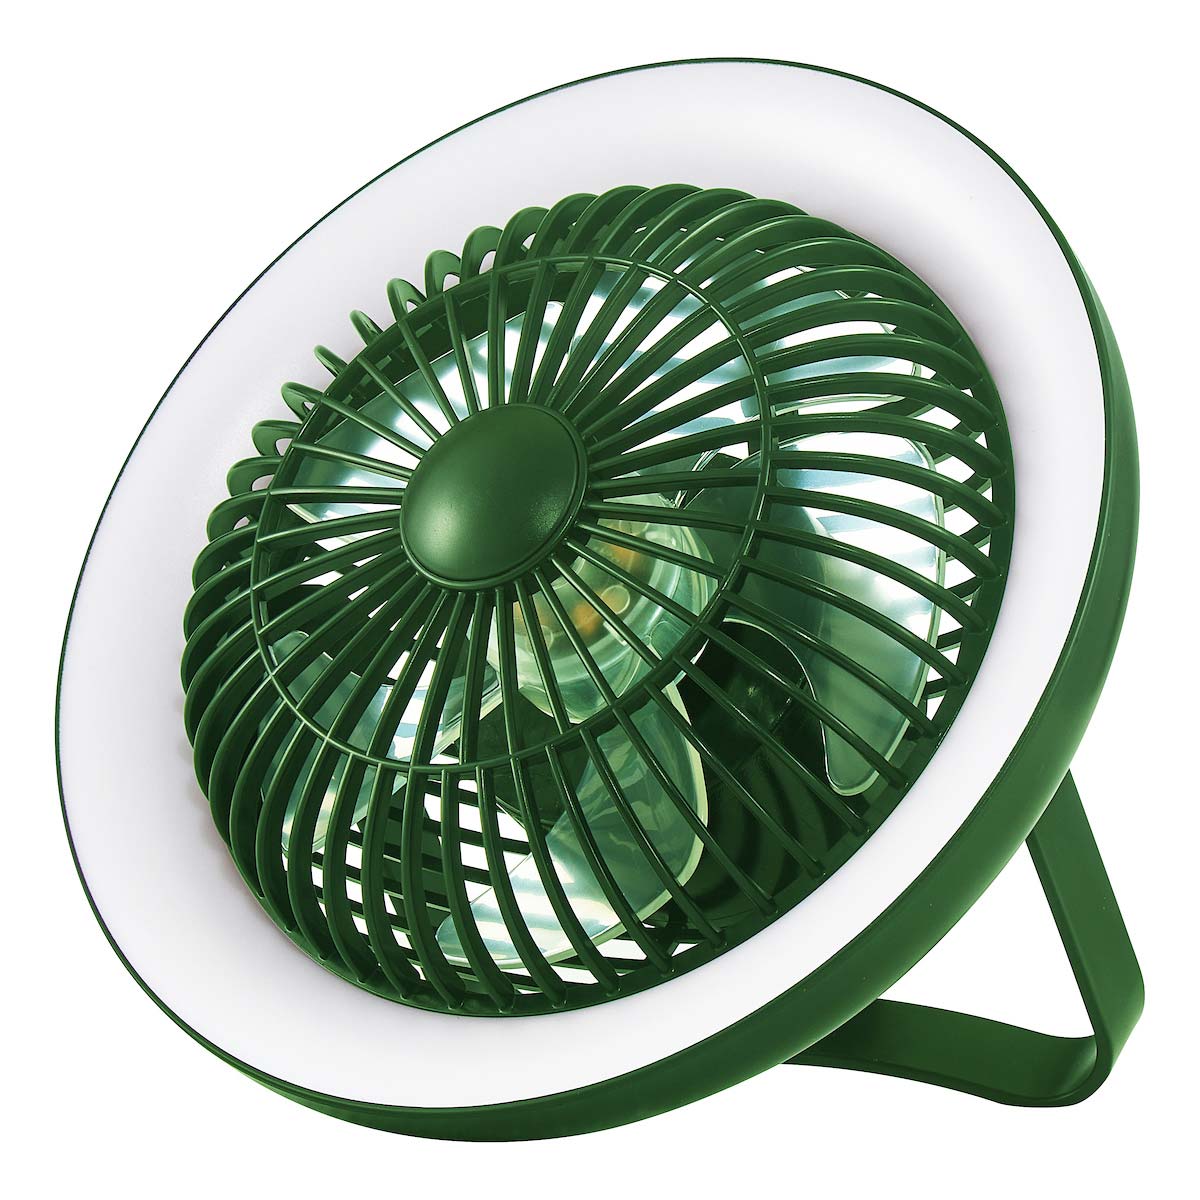 Turbo Rechargeable Desk Fan With Dimming LED Light Green